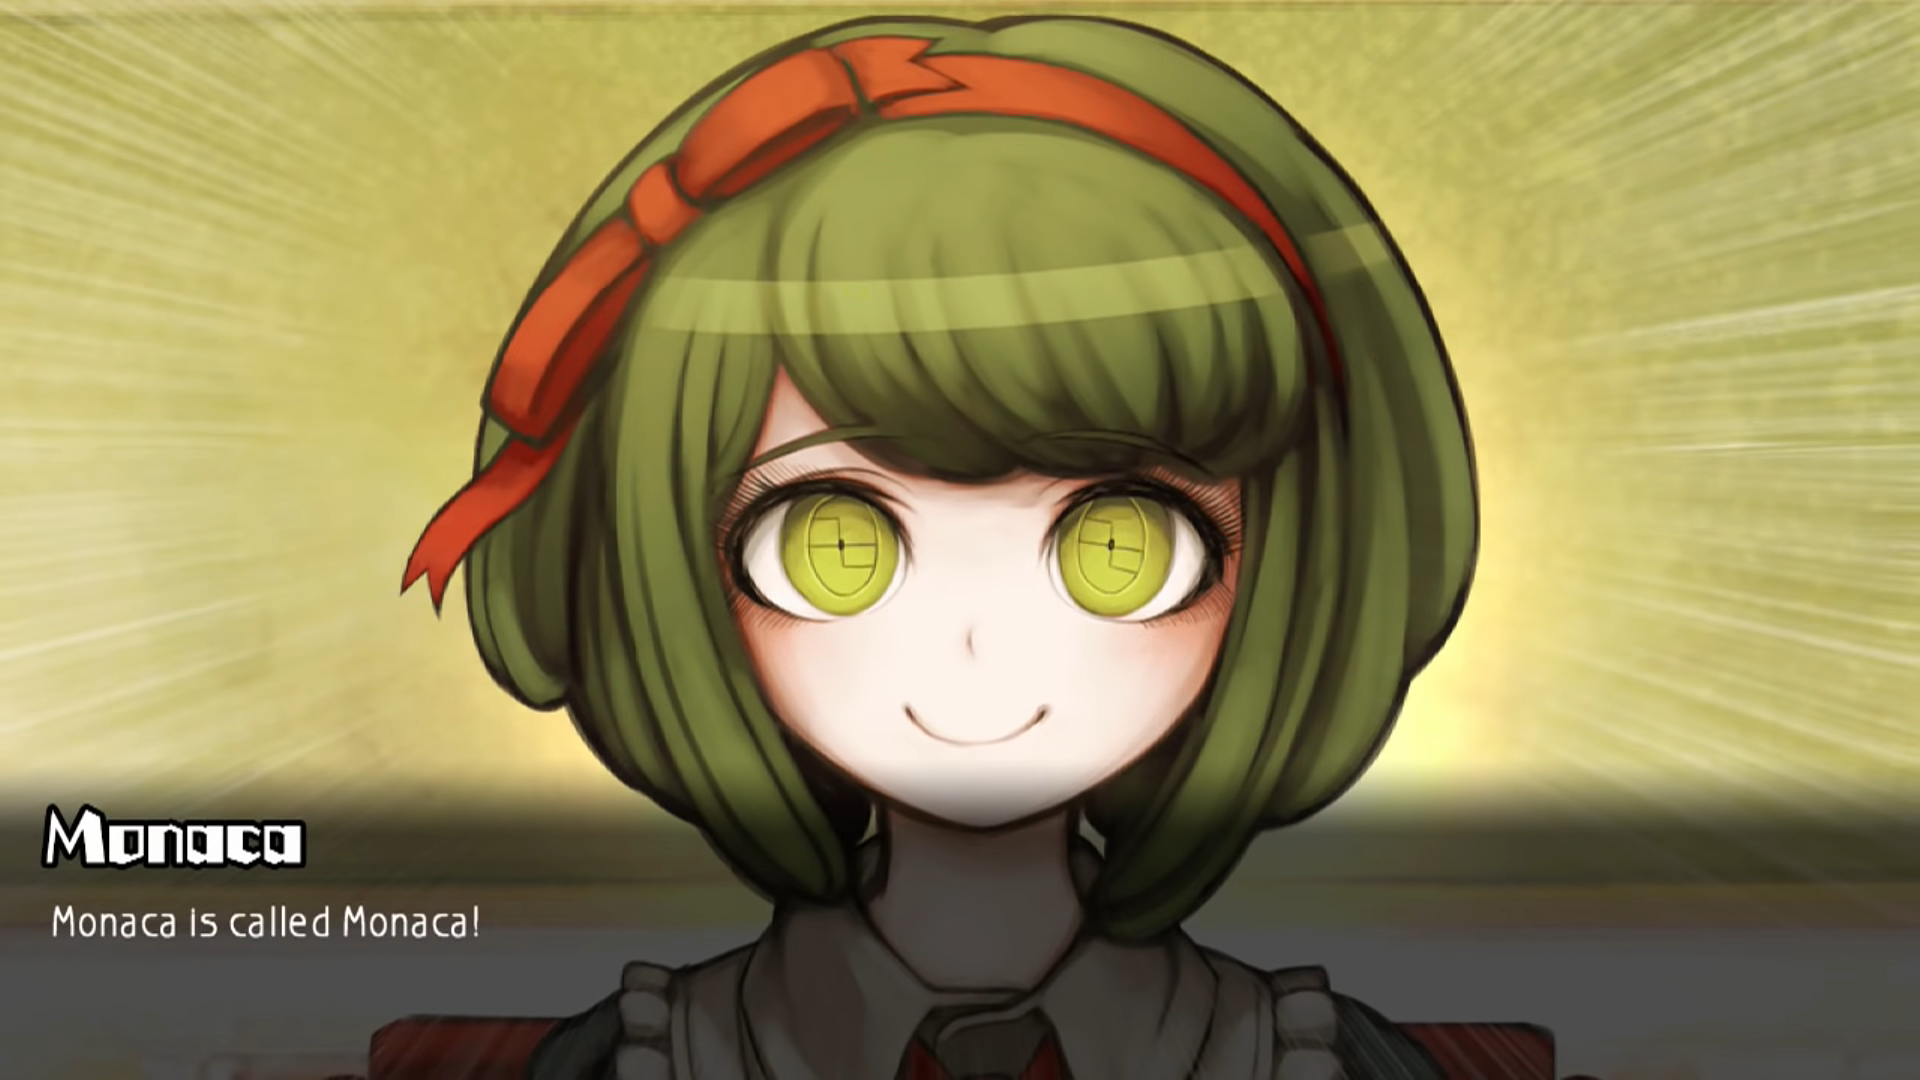 Monaca destroys the libtard demons with facts and logic!